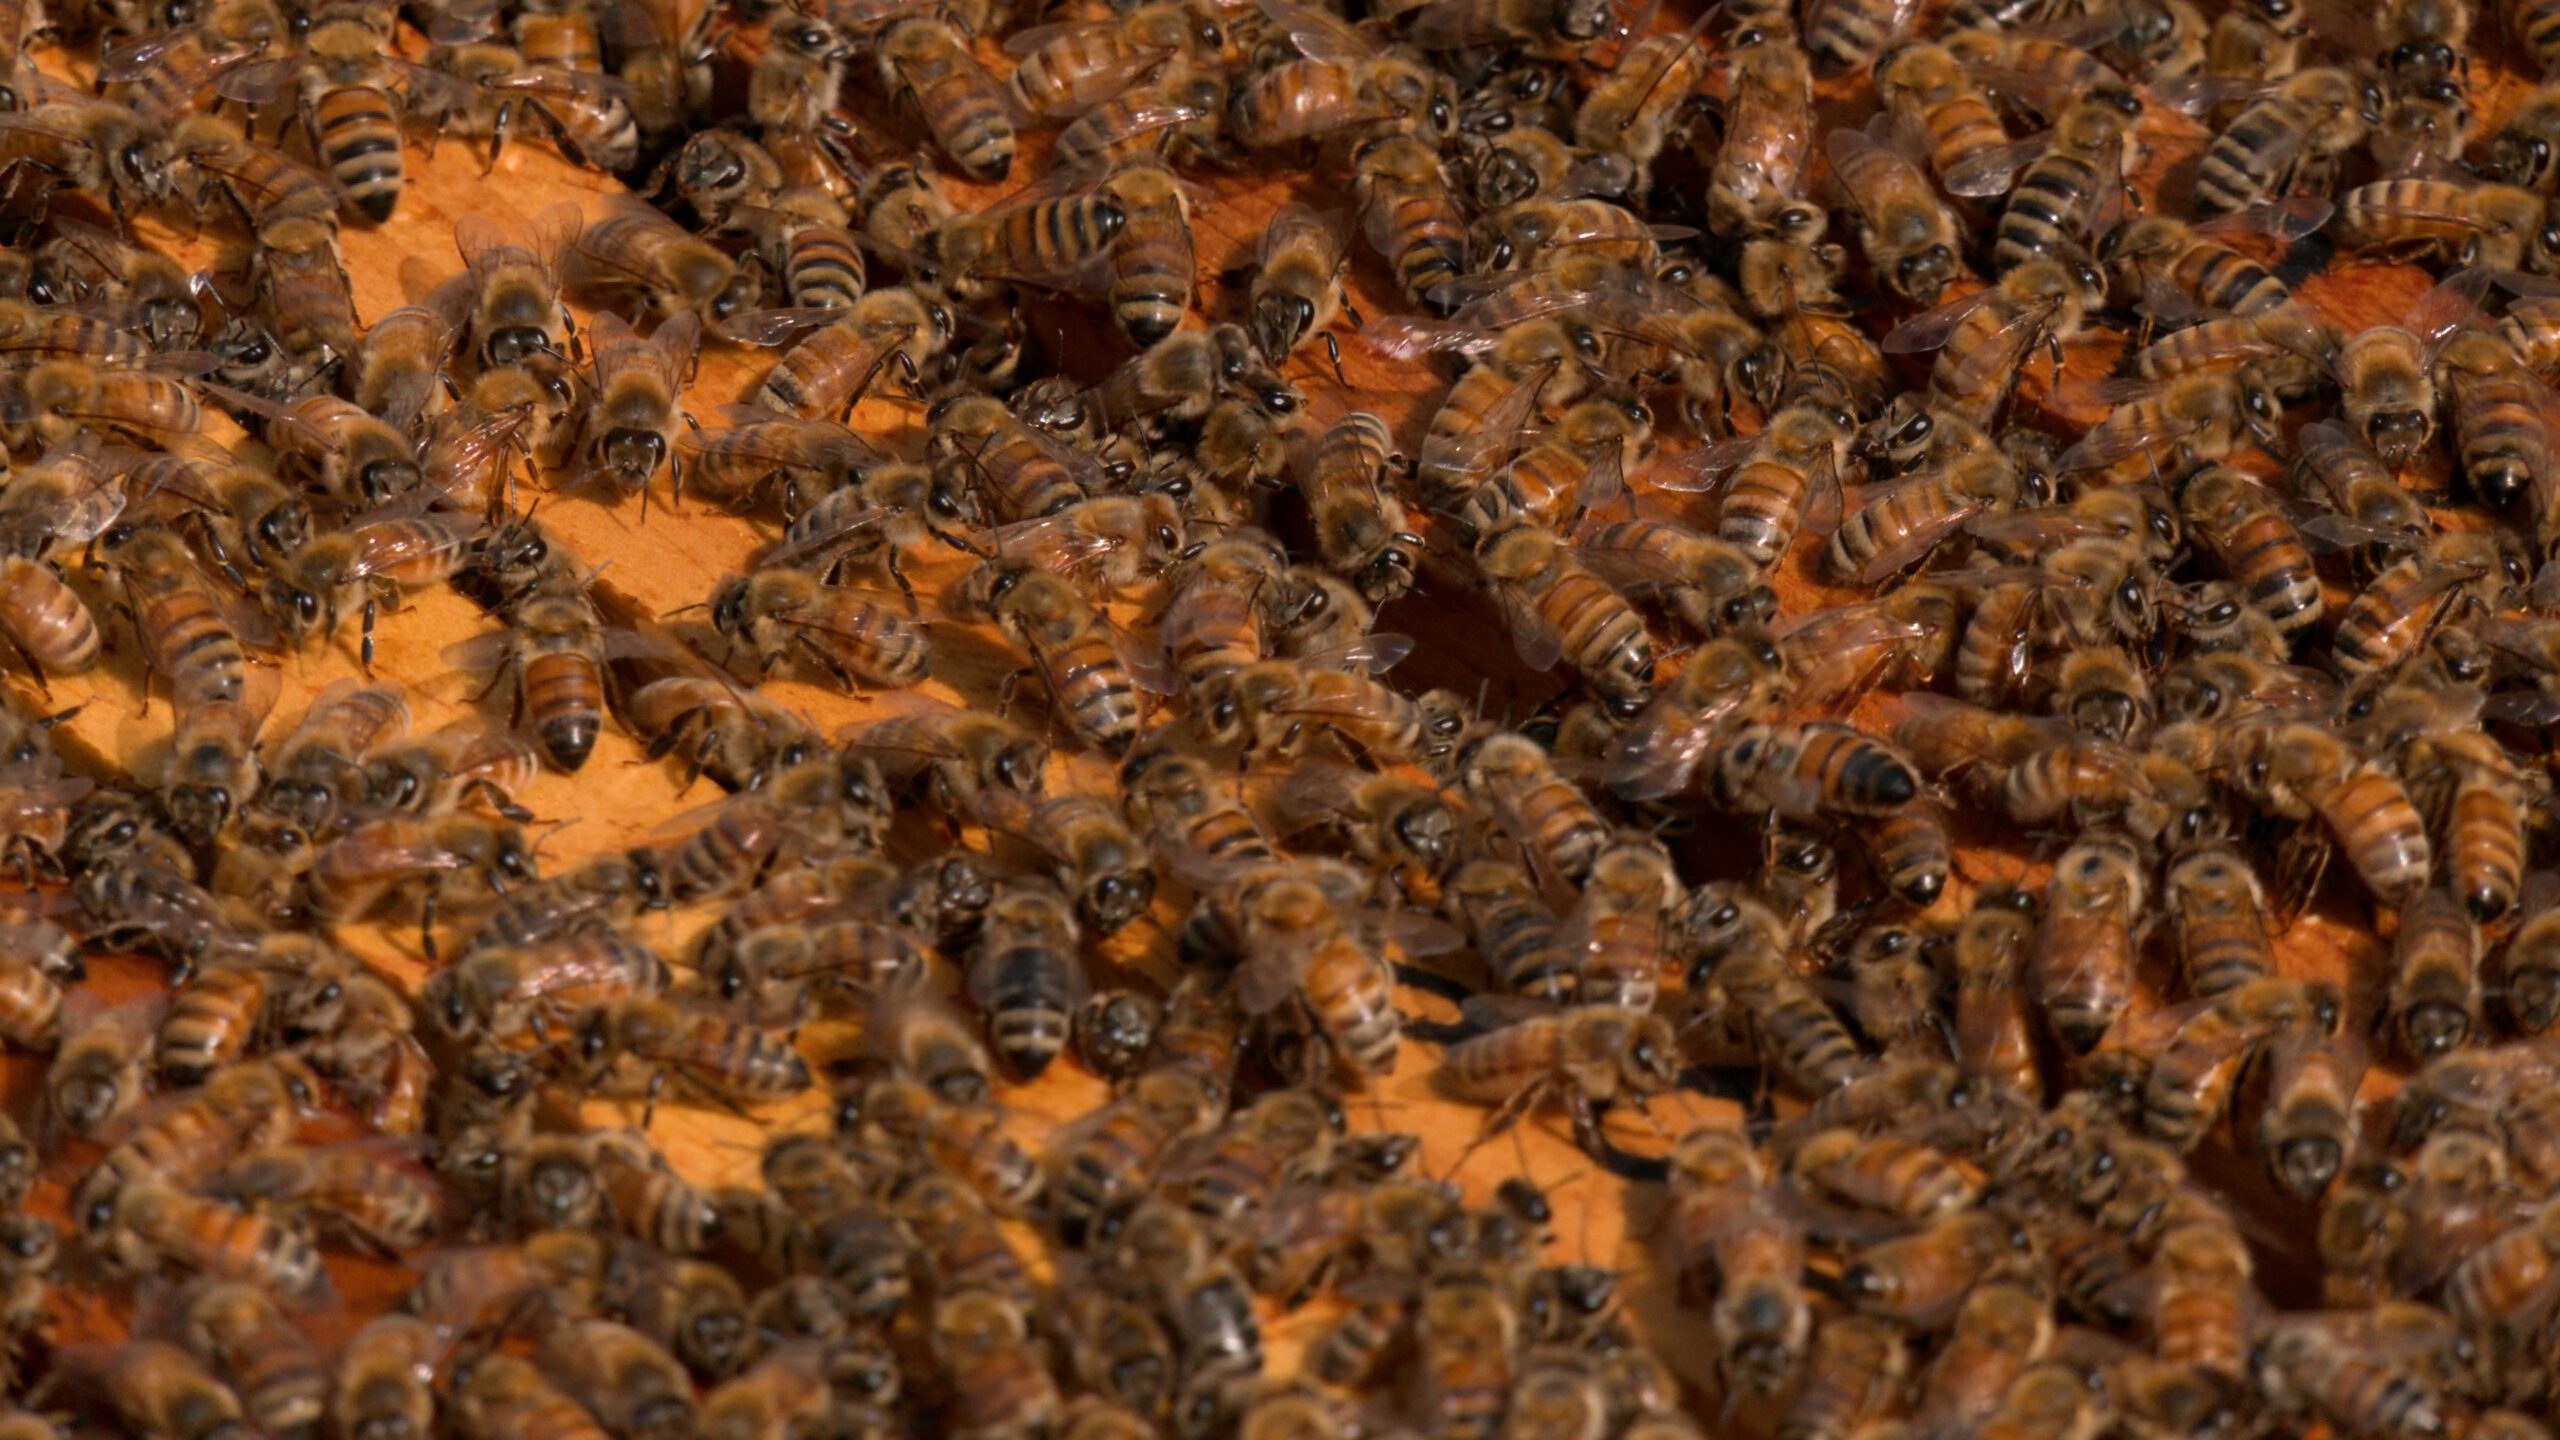 Miel bees in their hive